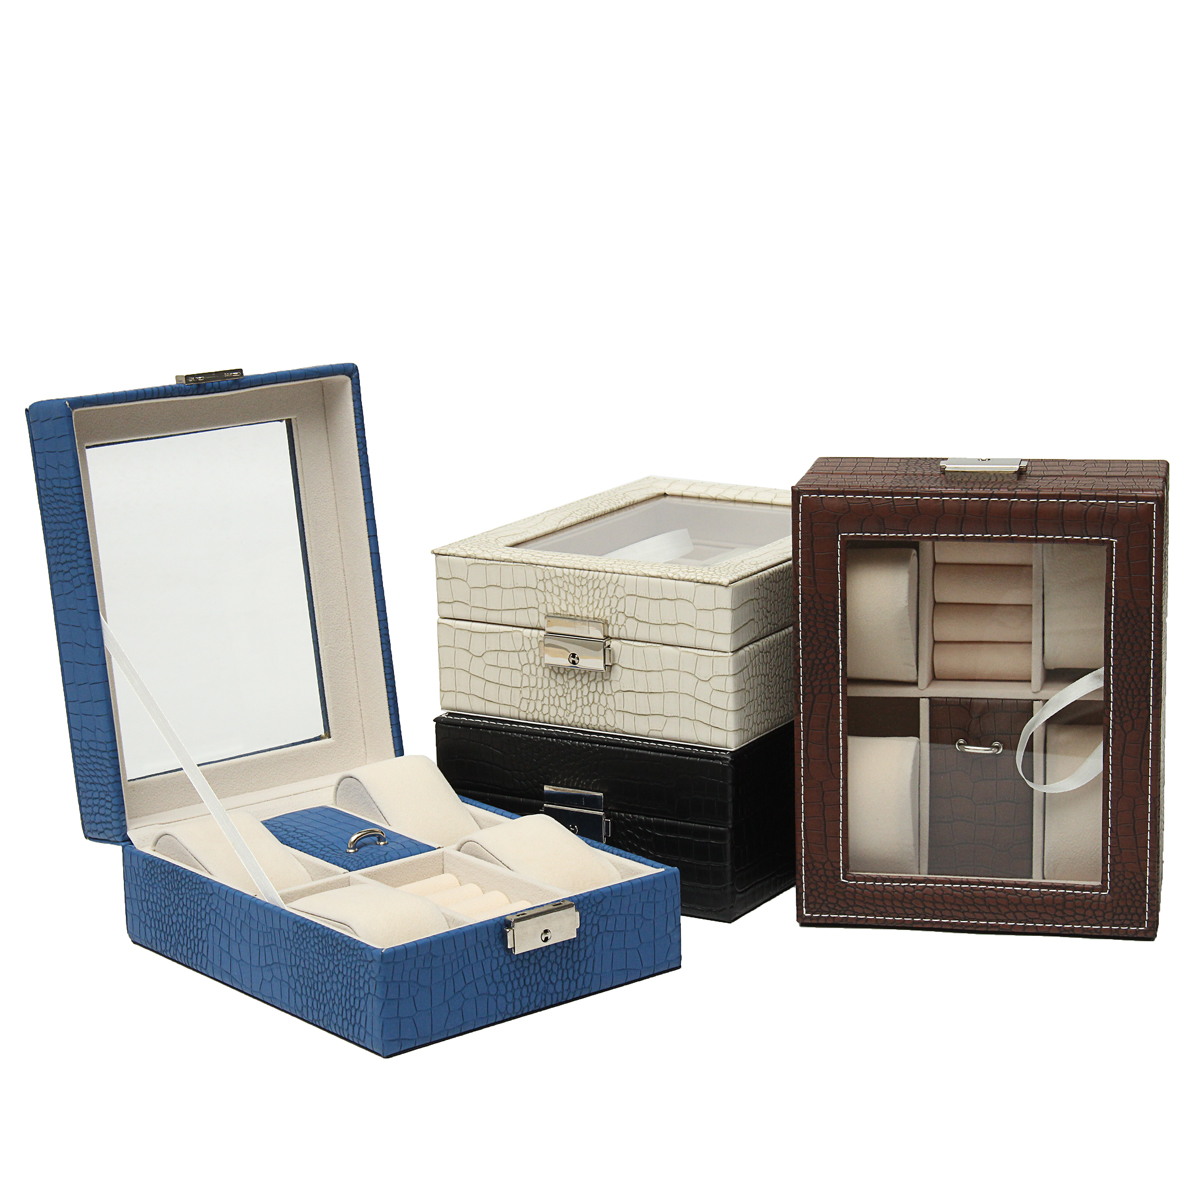 Leather-Display-Case-Organizer-Acrylic-Collection-Box-for-Storage-Watch-Jewelry-1212472-1